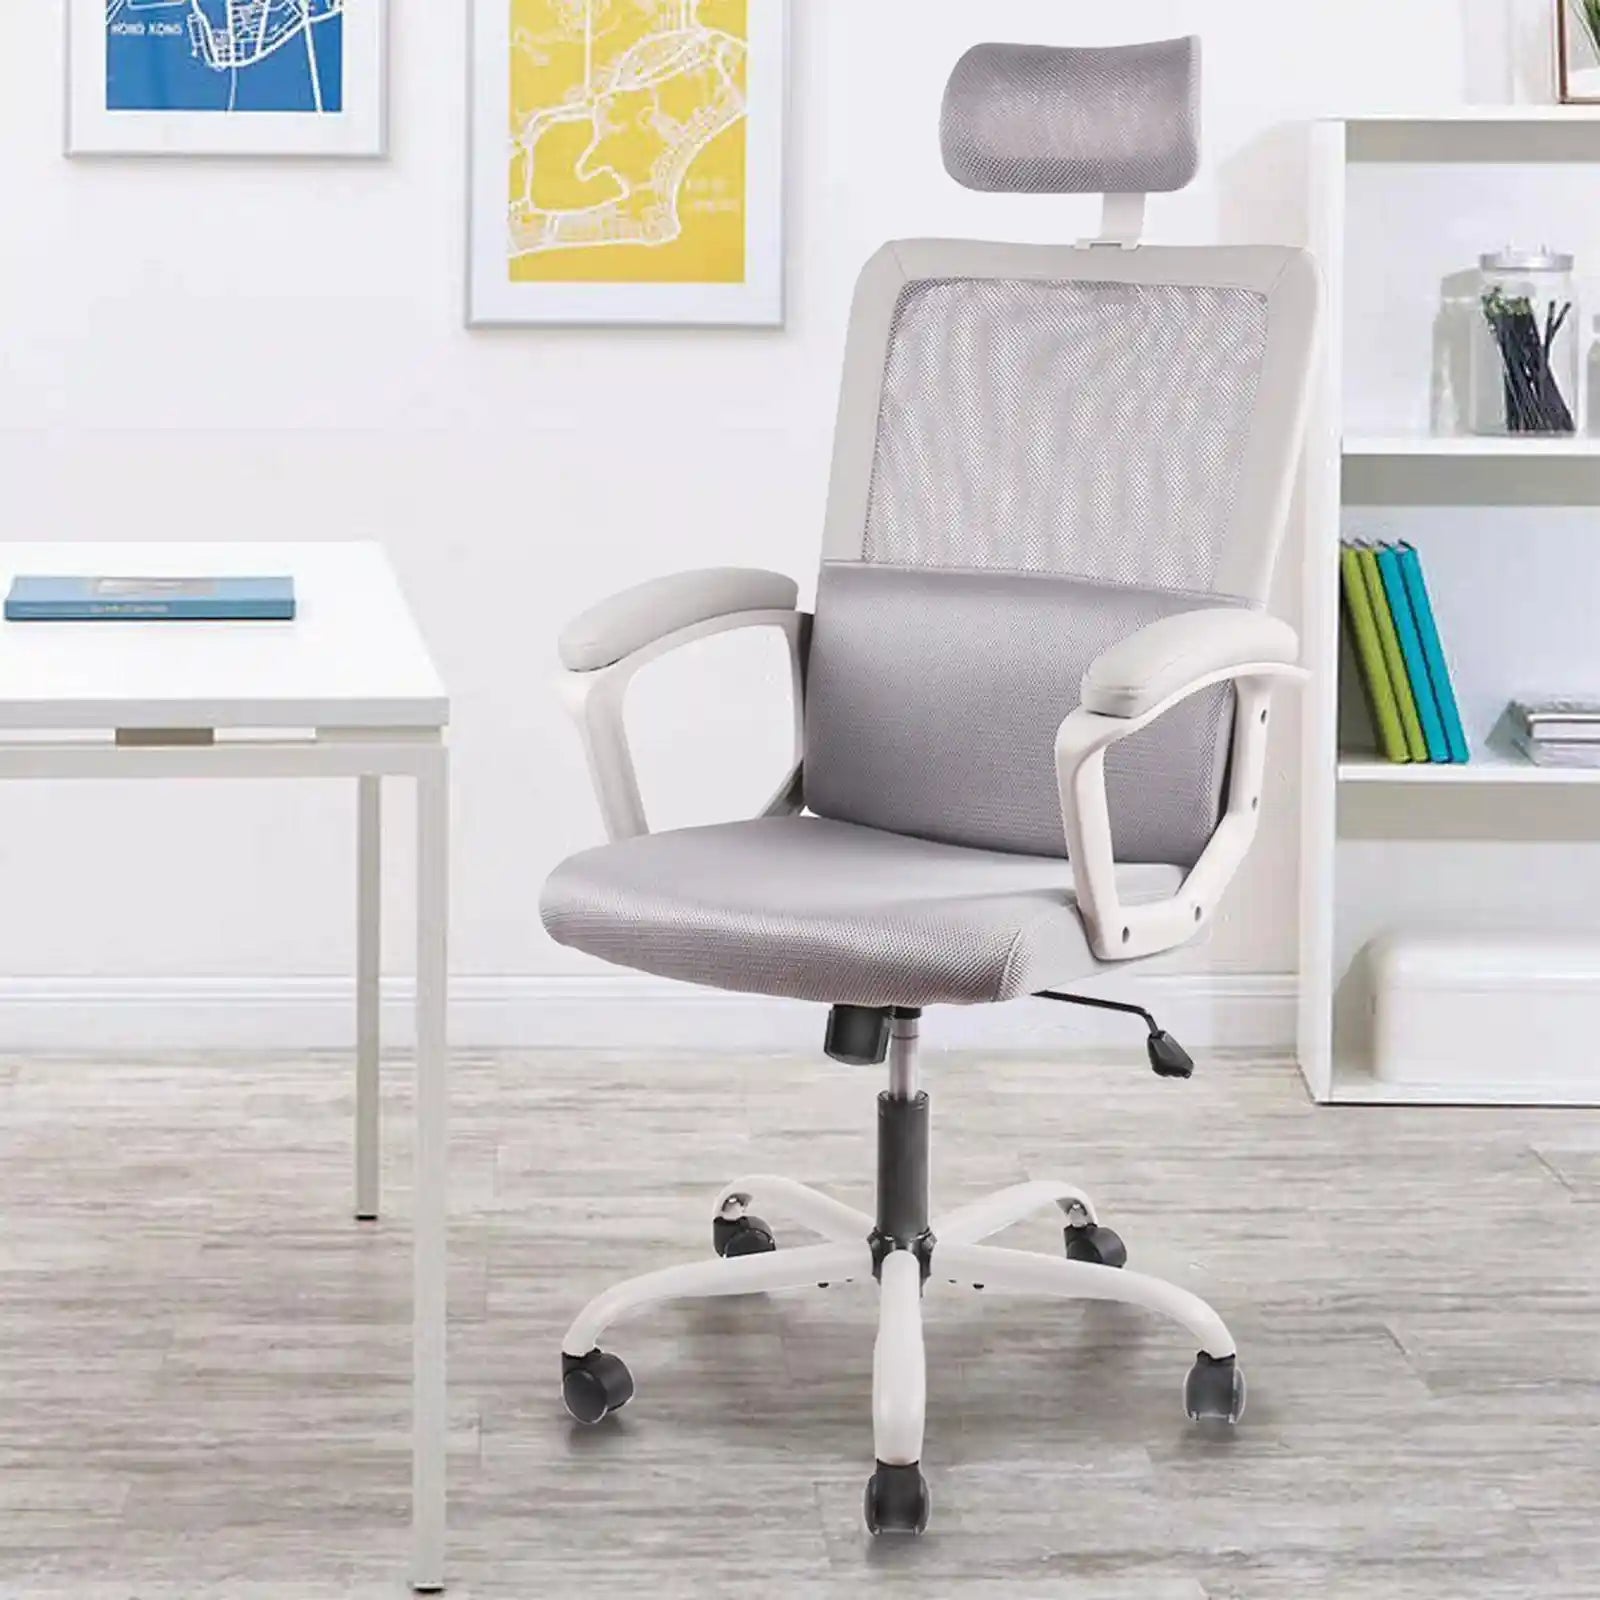 Ergonomic Chairs , Mesh Desk Chair High Back Computer Chair with Headrest